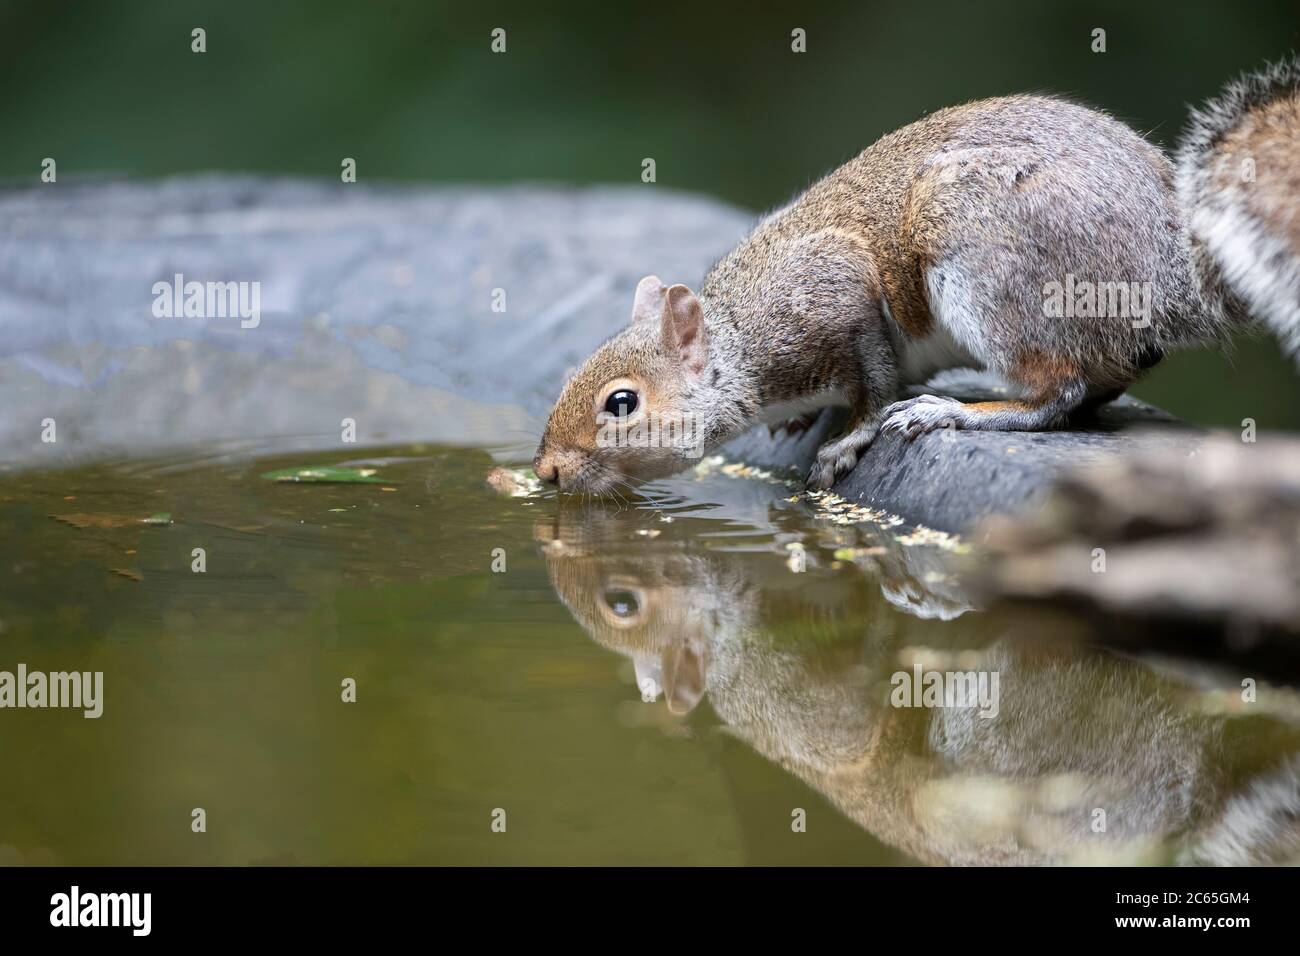 Grey Squirrel Sciurus carolinensis or Eastern Gray Squirrel in profile crouching to drink water from a wildlife pond in Yorkshire U.K. Stock Photo